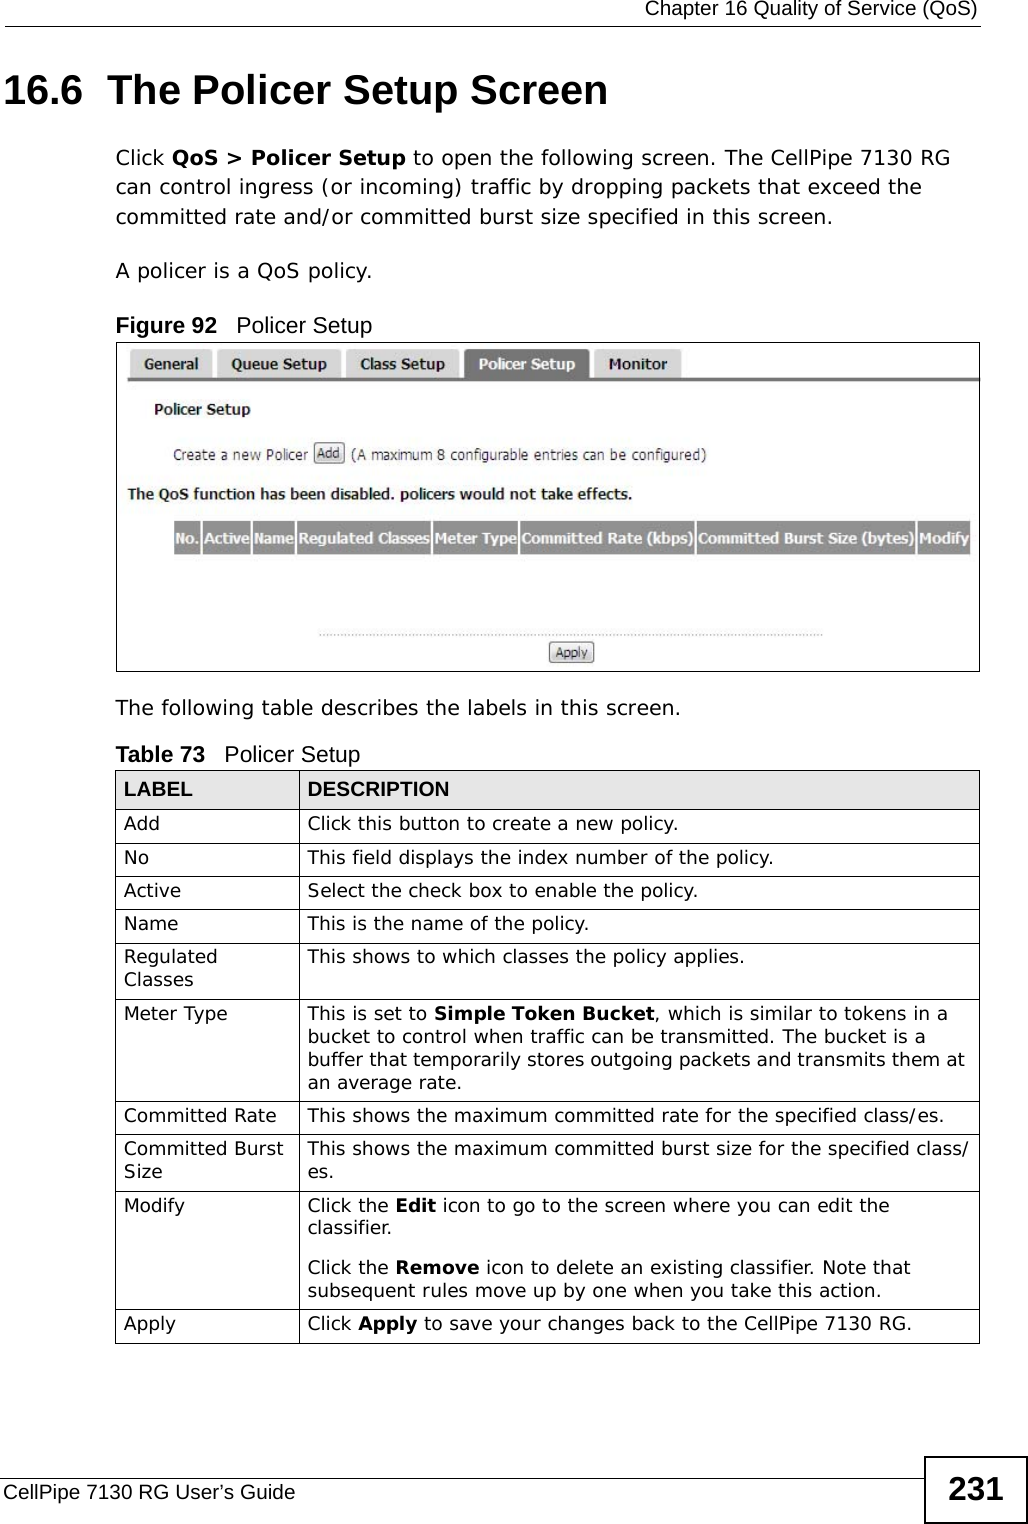  Chapter 16 Quality of Service (QoS)CellPipe 7130 RG User’s Guide 23116.6  The Policer Setup Screen     Click QoS &gt; Policer Setup to open the following screen. The CellPipe 7130 RG can control ingress (or incoming) traffic by dropping packets that exceed the committed rate and/or committed burst size specified in this screen.A policer is a QoS policy.Figure 92   Policer Setup The following table describes the labels in this screen.Table 73   Policer SetupLABEL DESCRIPTIONAdd Click this button to create a new policy.No  This field displays the index number of the policy.Active Select the check box to enable the policy.Name This is the name of the policy.Regulated Classes This shows to which classes the policy applies.Meter Type This is set to Simple Token Bucket, which is similar to tokens in a bucket to control when traffic can be transmitted. The bucket is a buffer that temporarily stores outgoing packets and transmits them at an average rate.Committed Rate This shows the maximum committed rate for the specified class/es.Committed Burst Size This shows the maximum committed burst size for the specified class/es.Modify Click the Edit icon to go to the screen where you can edit the classifier.Click the Remove icon to delete an existing classifier. Note that subsequent rules move up by one when you take this action.Apply Click Apply to save your changes back to the CellPipe 7130 RG.